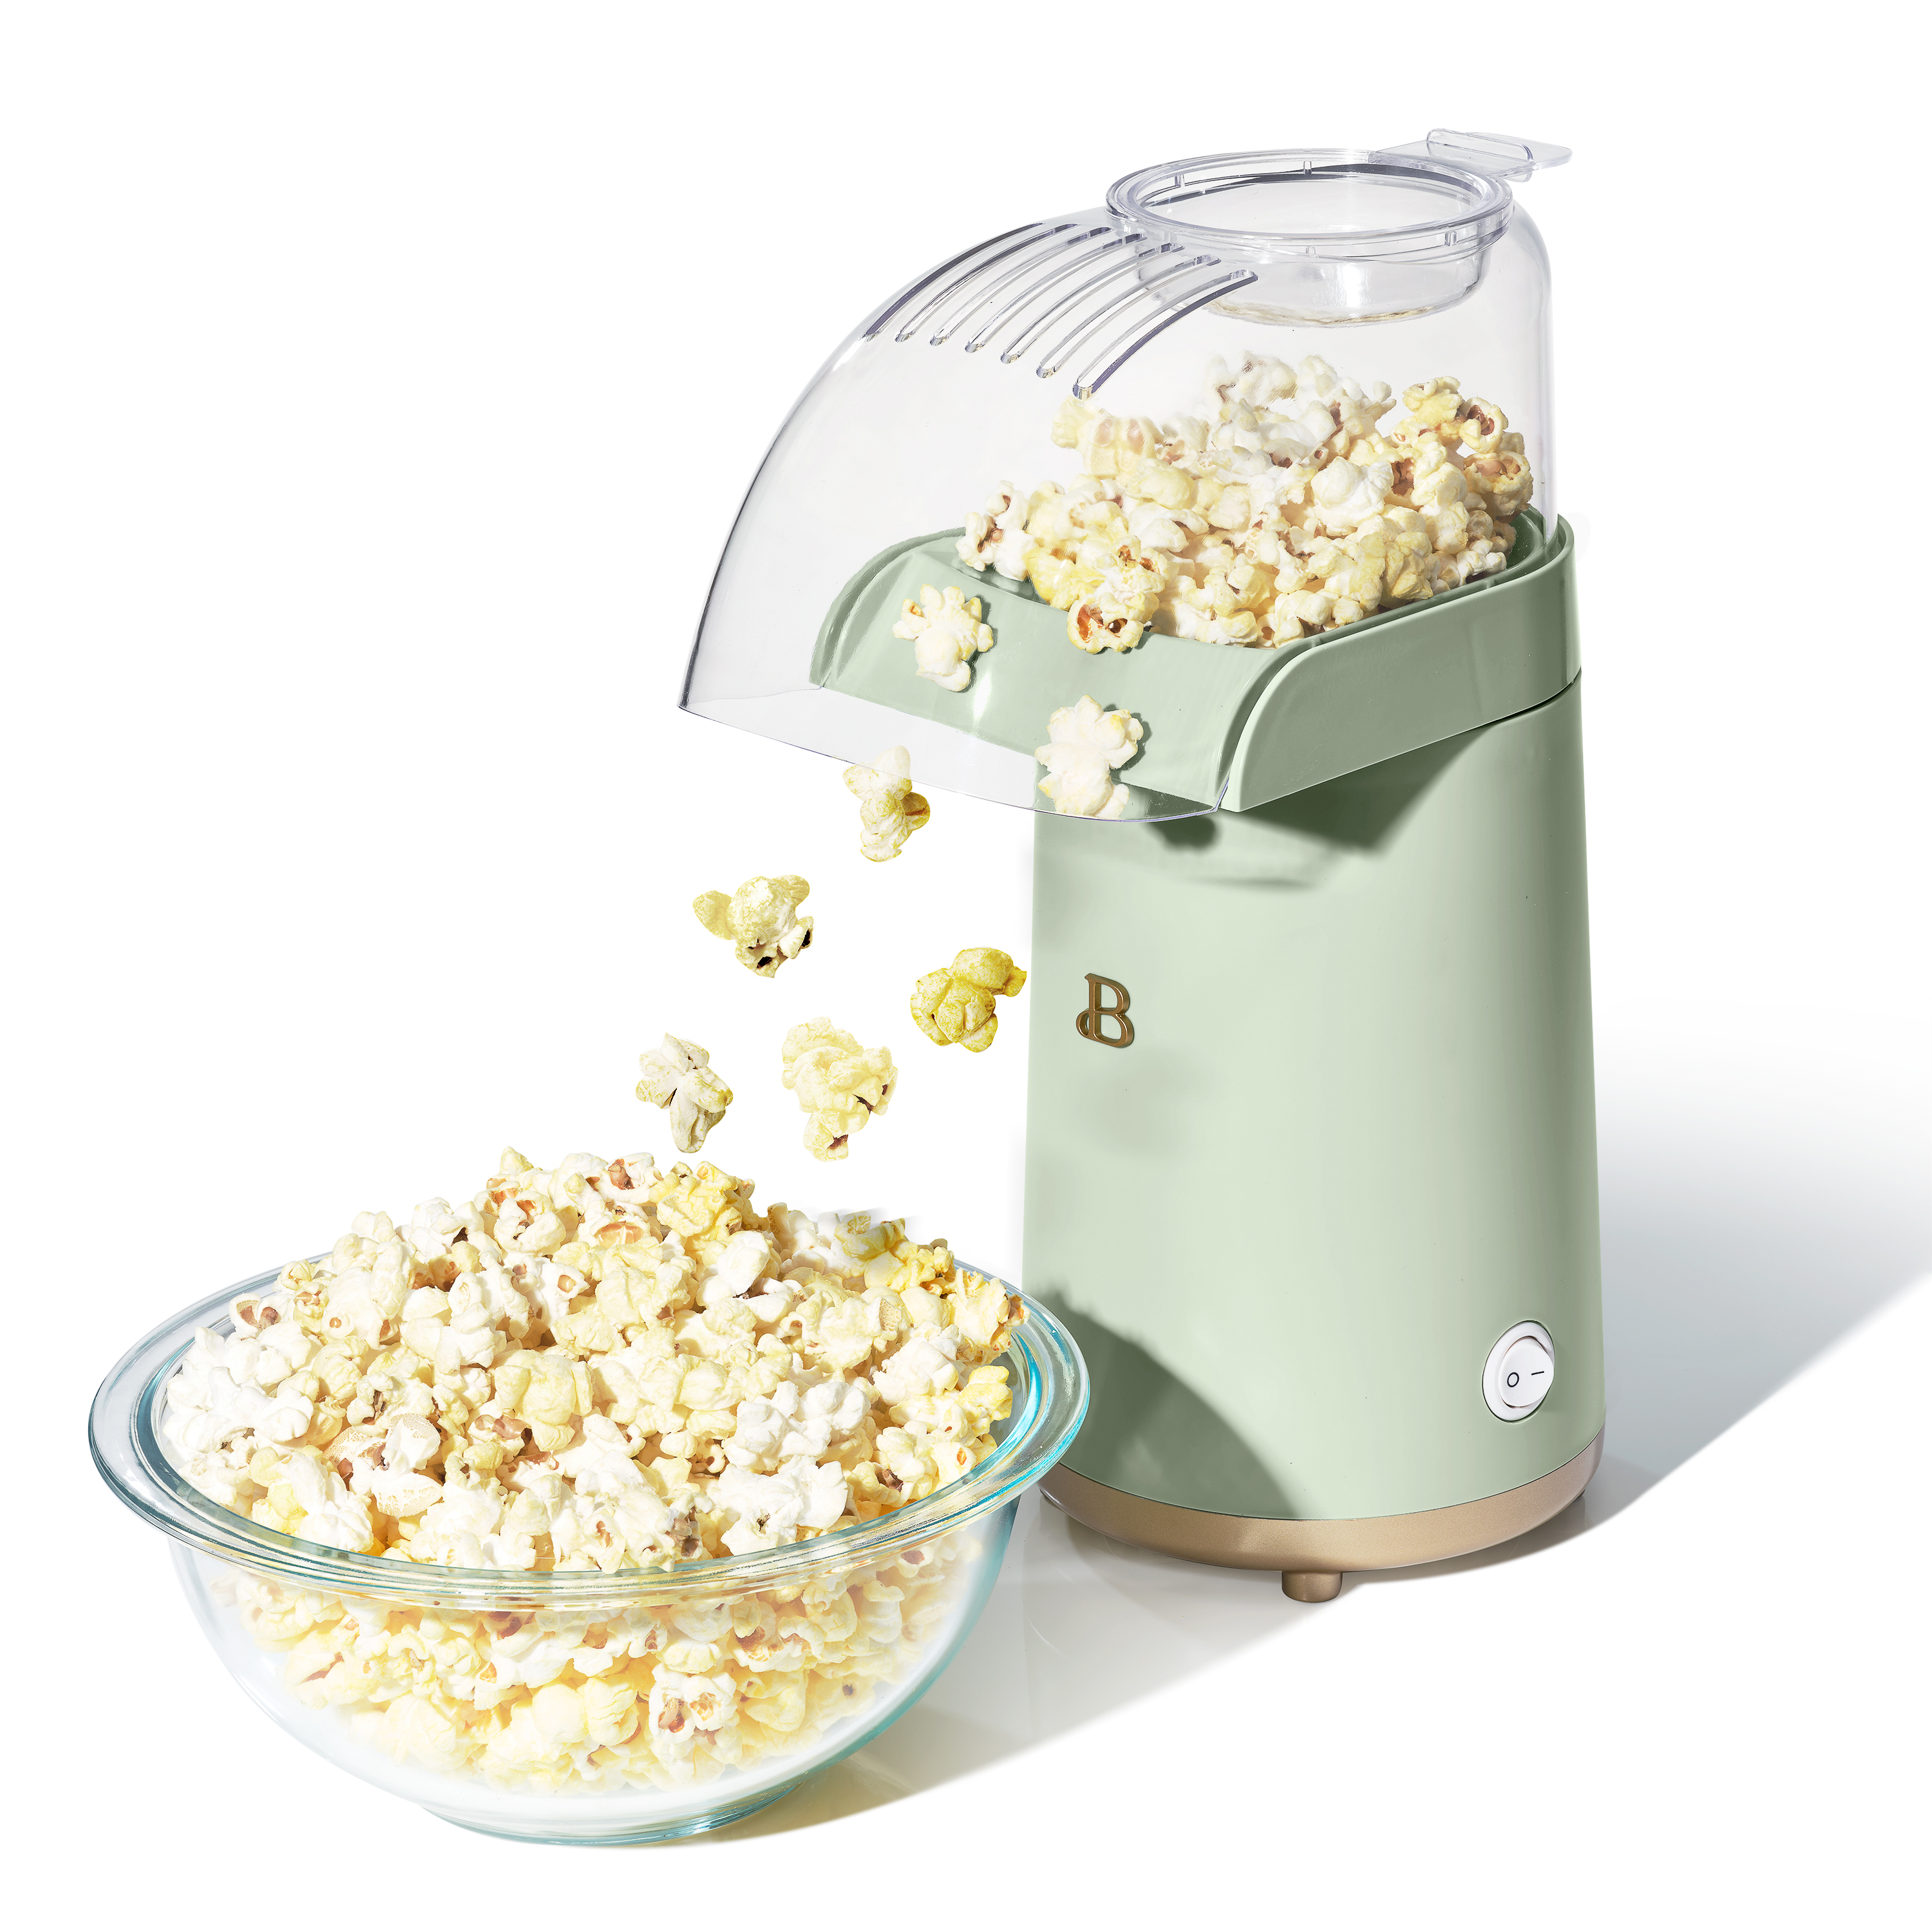 Beautiful 16 Cup Hot Air Electric Popcorn Maker, Sage Green by Drew Barrymore - image 1 of 13